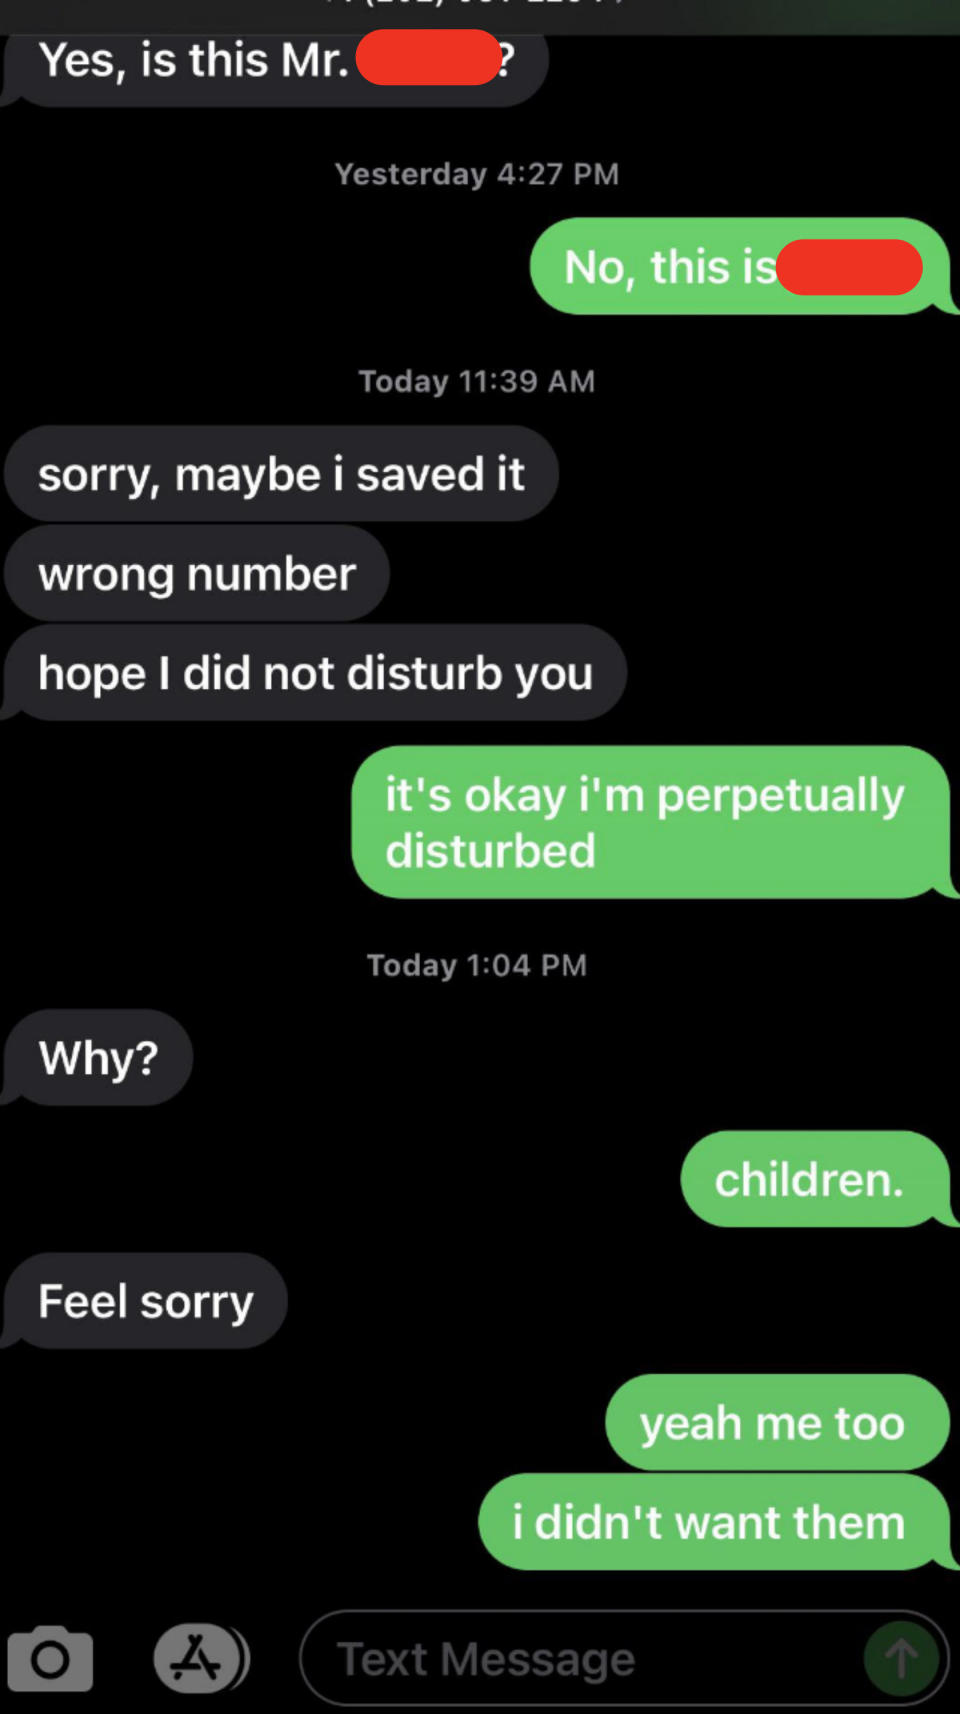 Person tells wrong number they're sorry to disturb them, and response is that they're "perpetually disturbed" because they have children and didn't want them